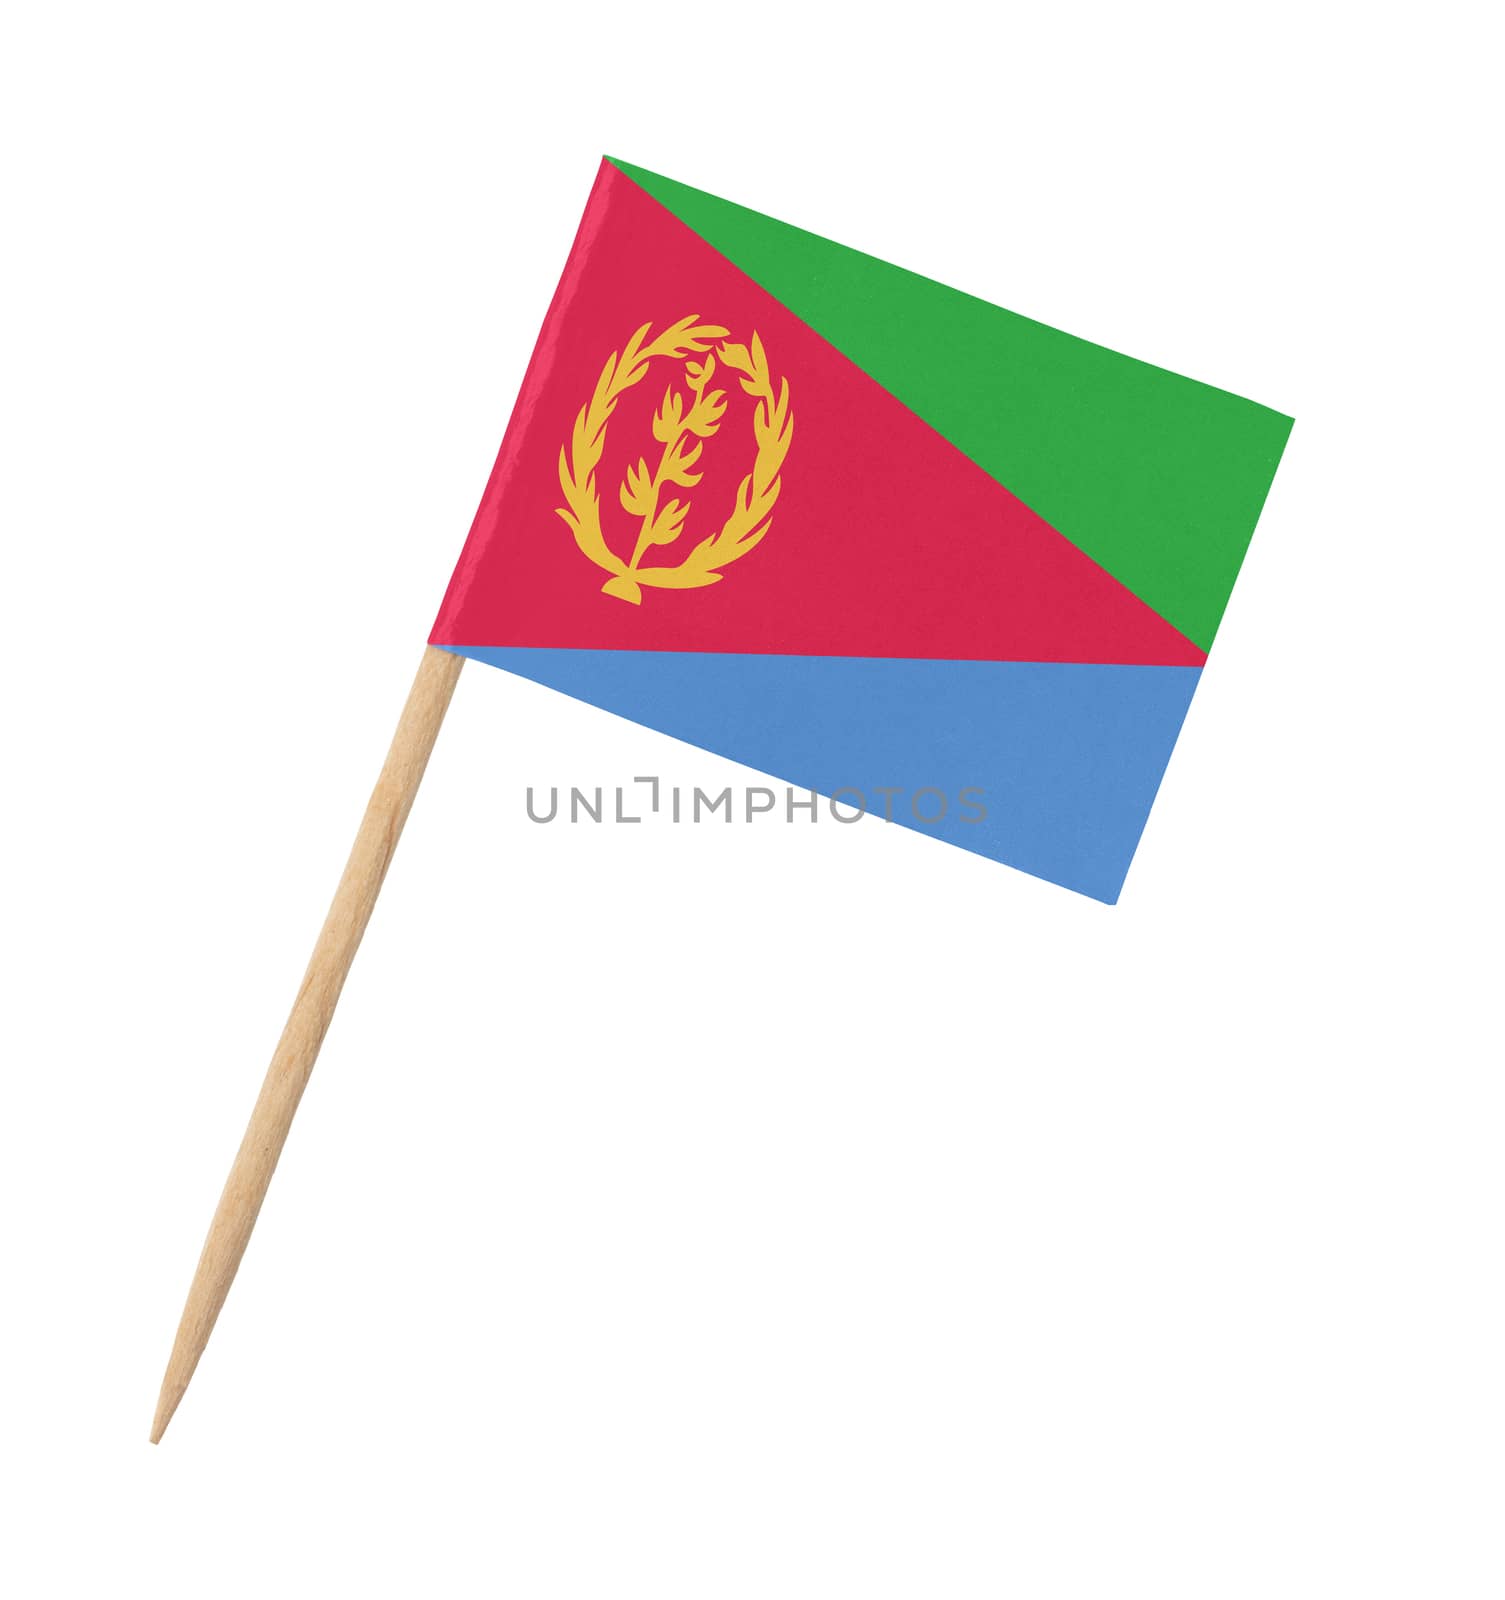 Small paper flag of Eritrea on wooden stick by michaklootwijk